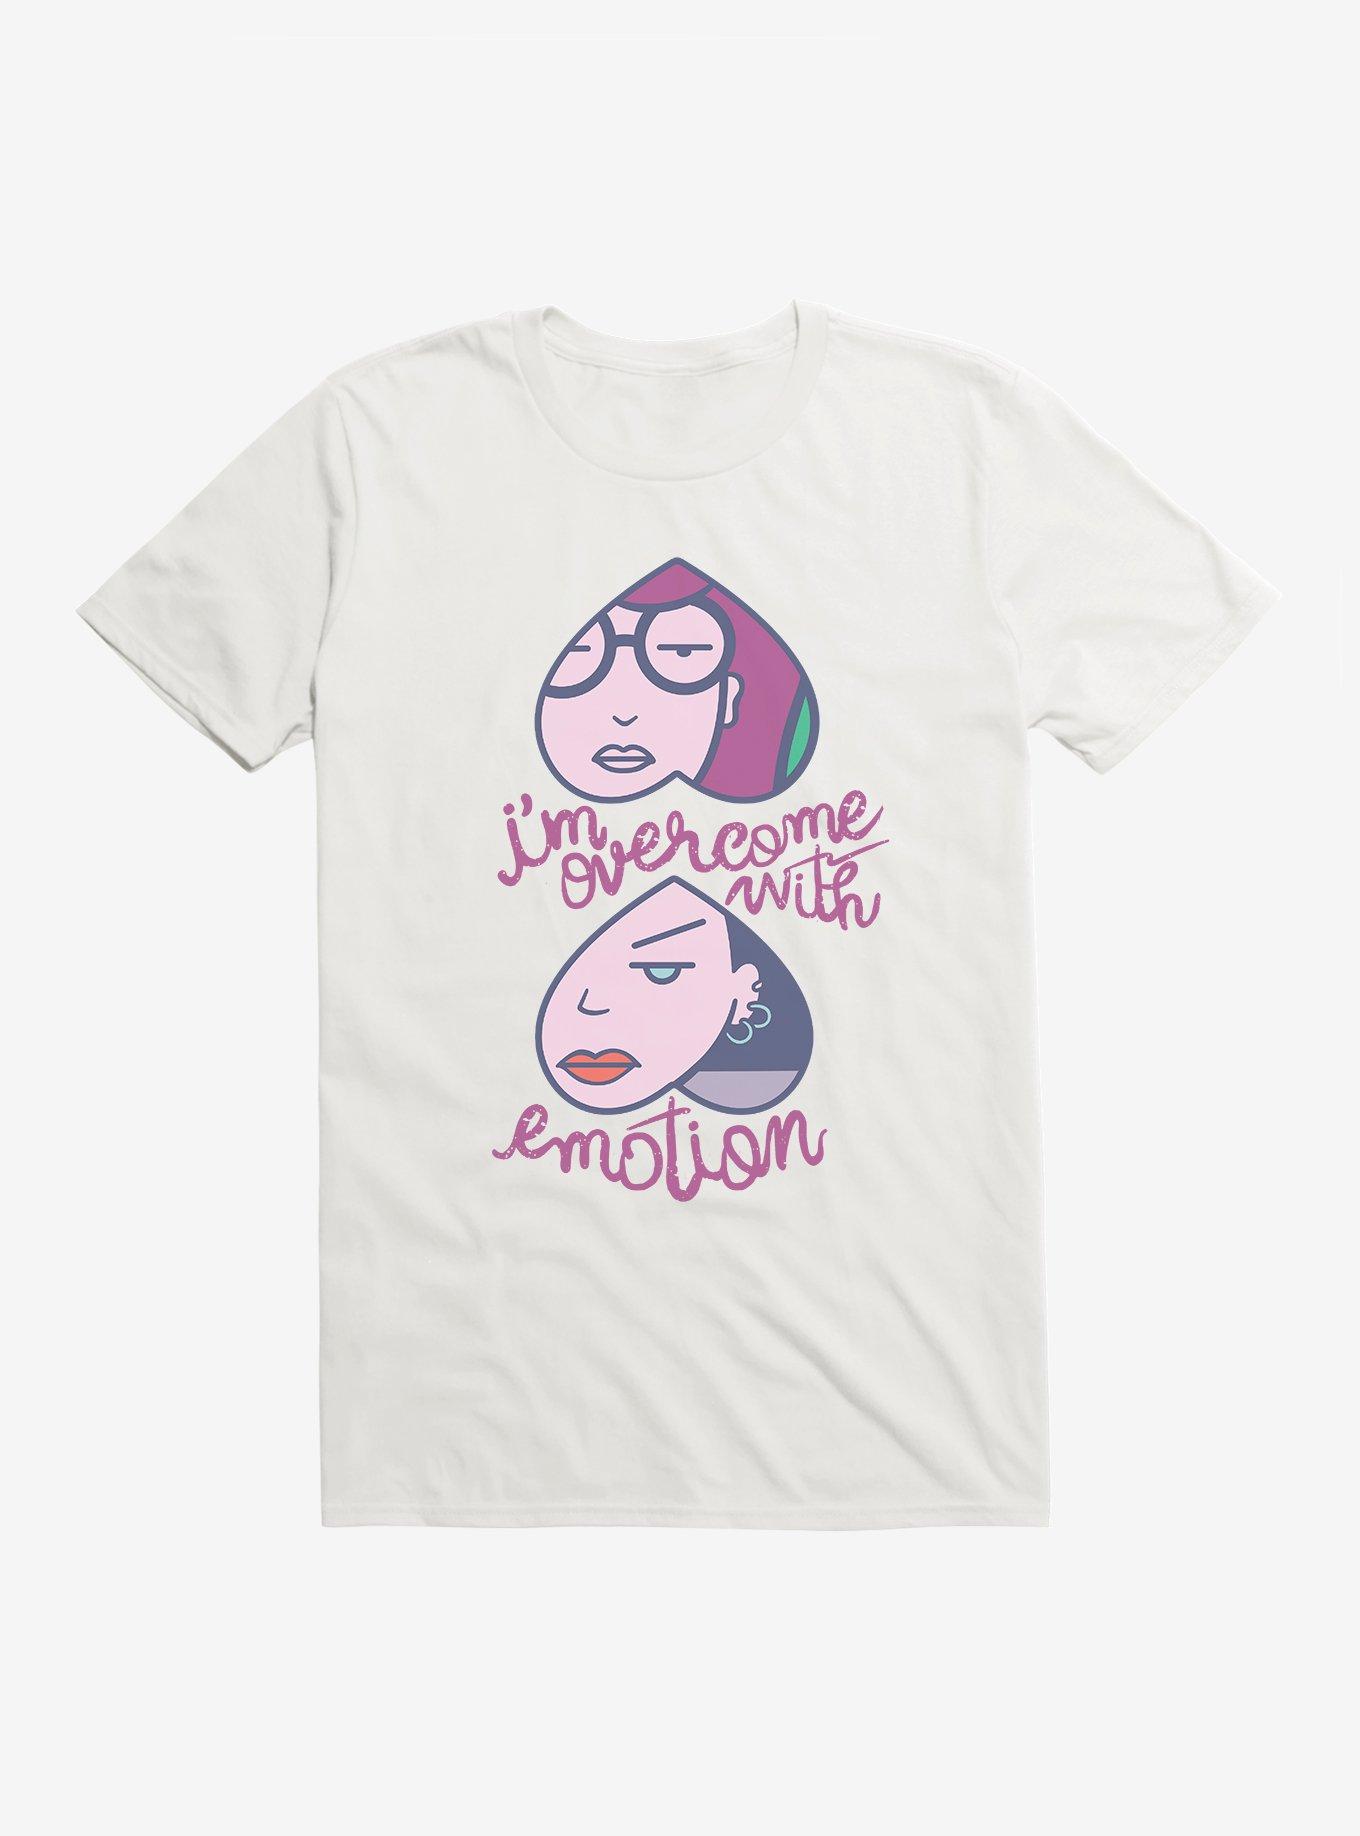 Daria Overcome with Emotion BFF Hearts T-Shirt